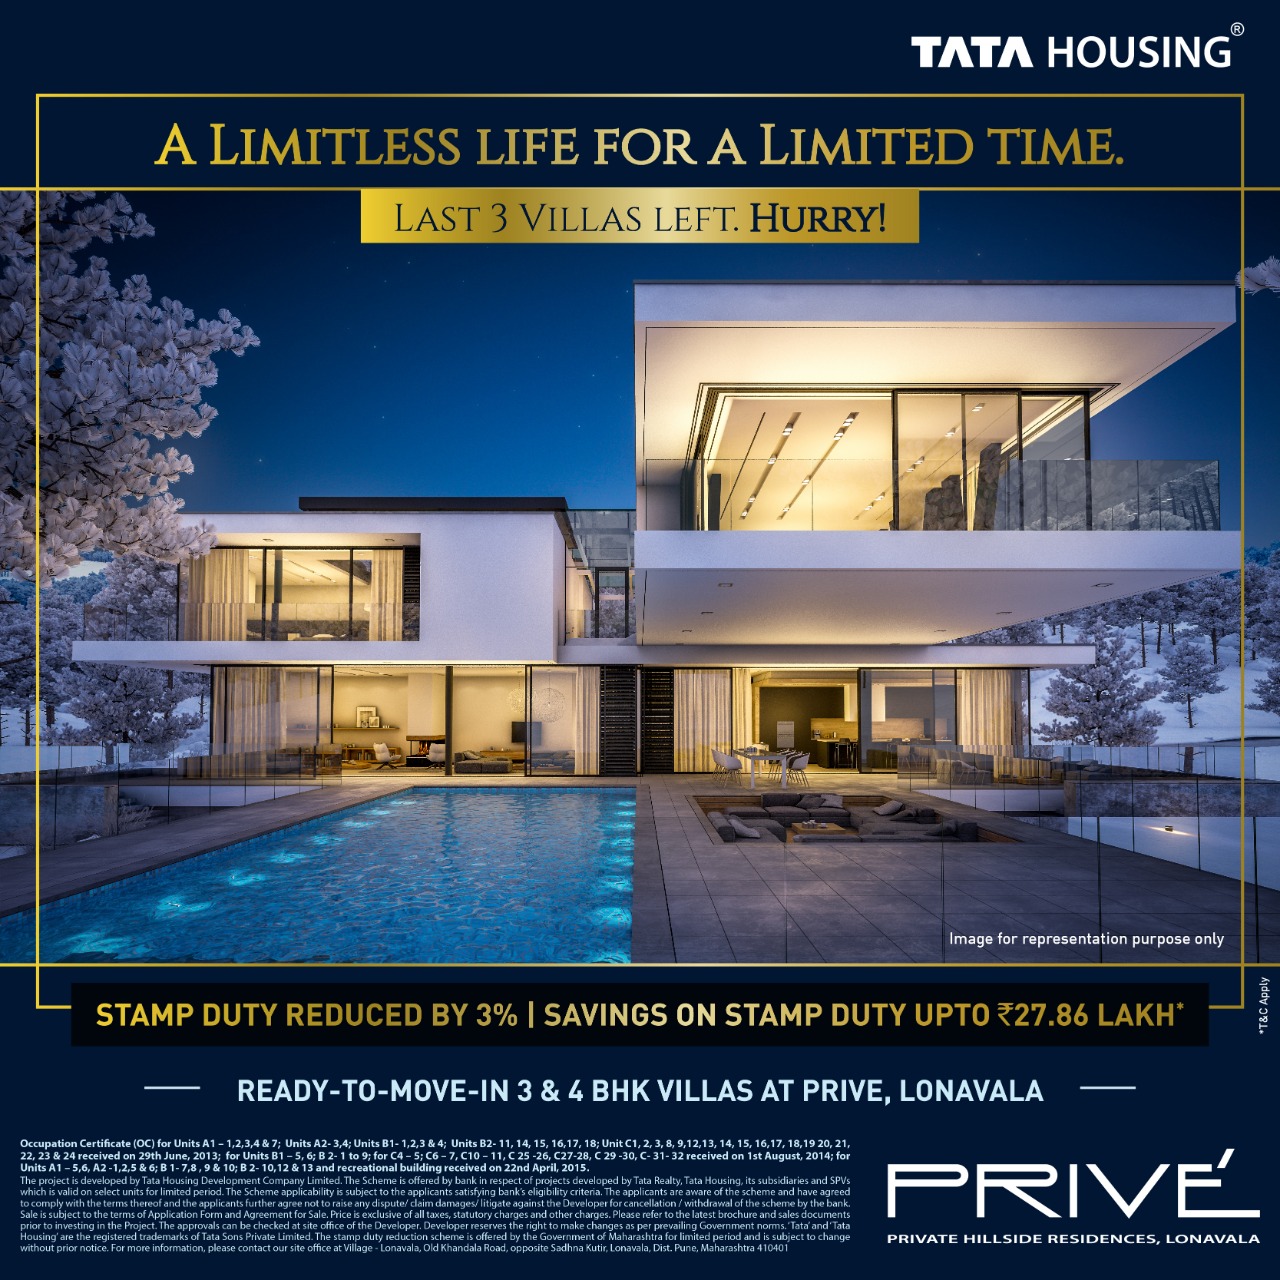 Ready to move in  3 & 4 BHK Villas  at Tata Housing Prive  in Lonavala Update